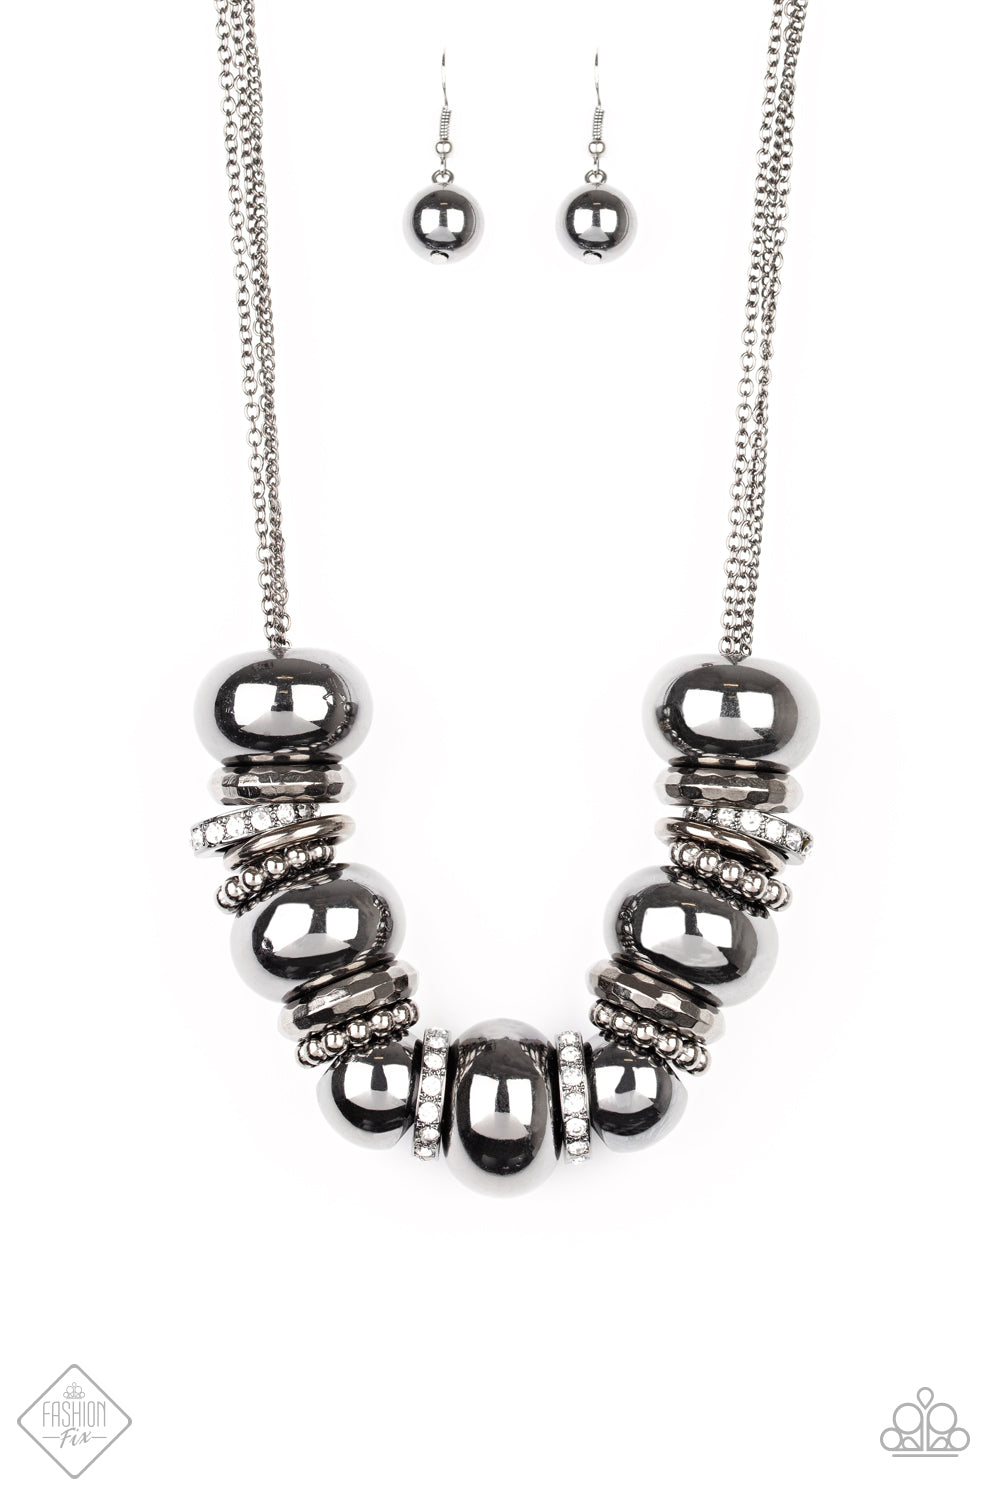 Paparazzi Only The Brave - Black - May 2020 Fashion Fix Necklace - A Finishing Touch 